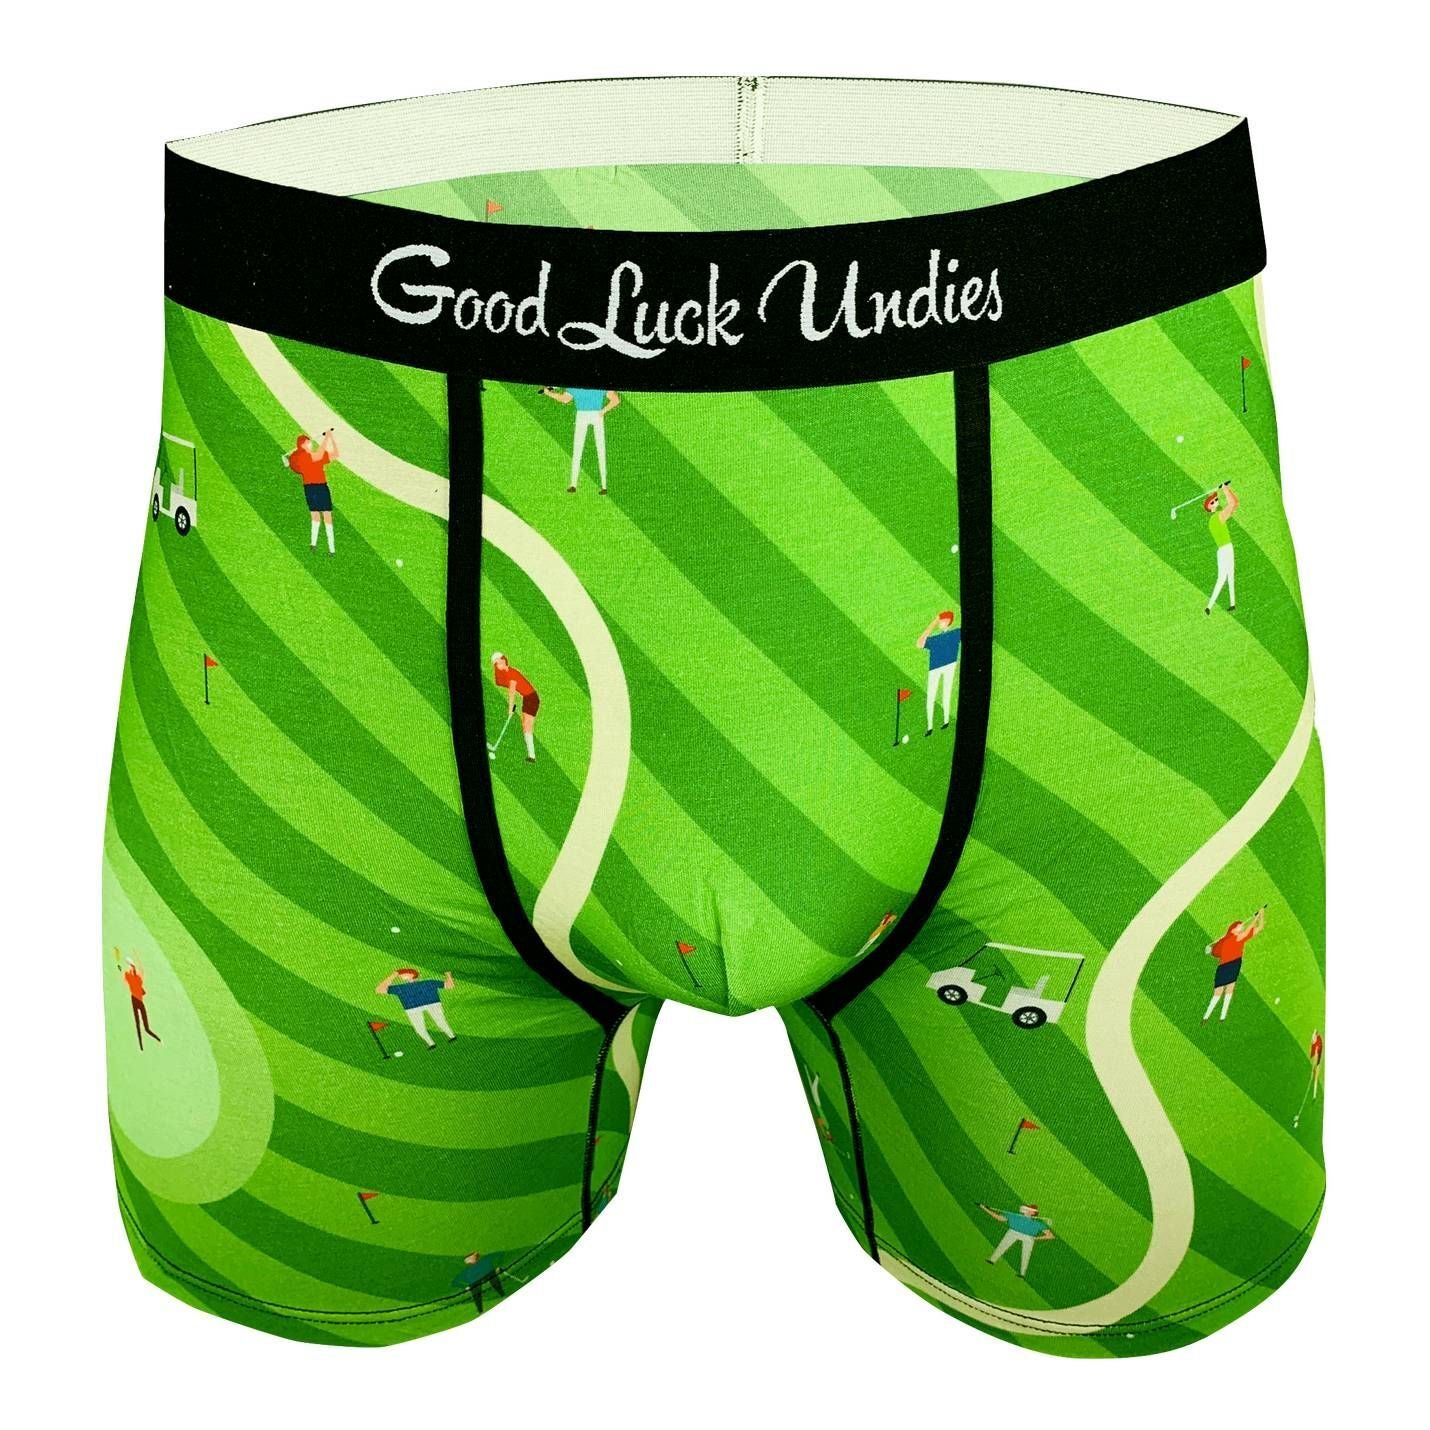 Tipsy Elves Golf Knickers for Men - Included Matching Socks